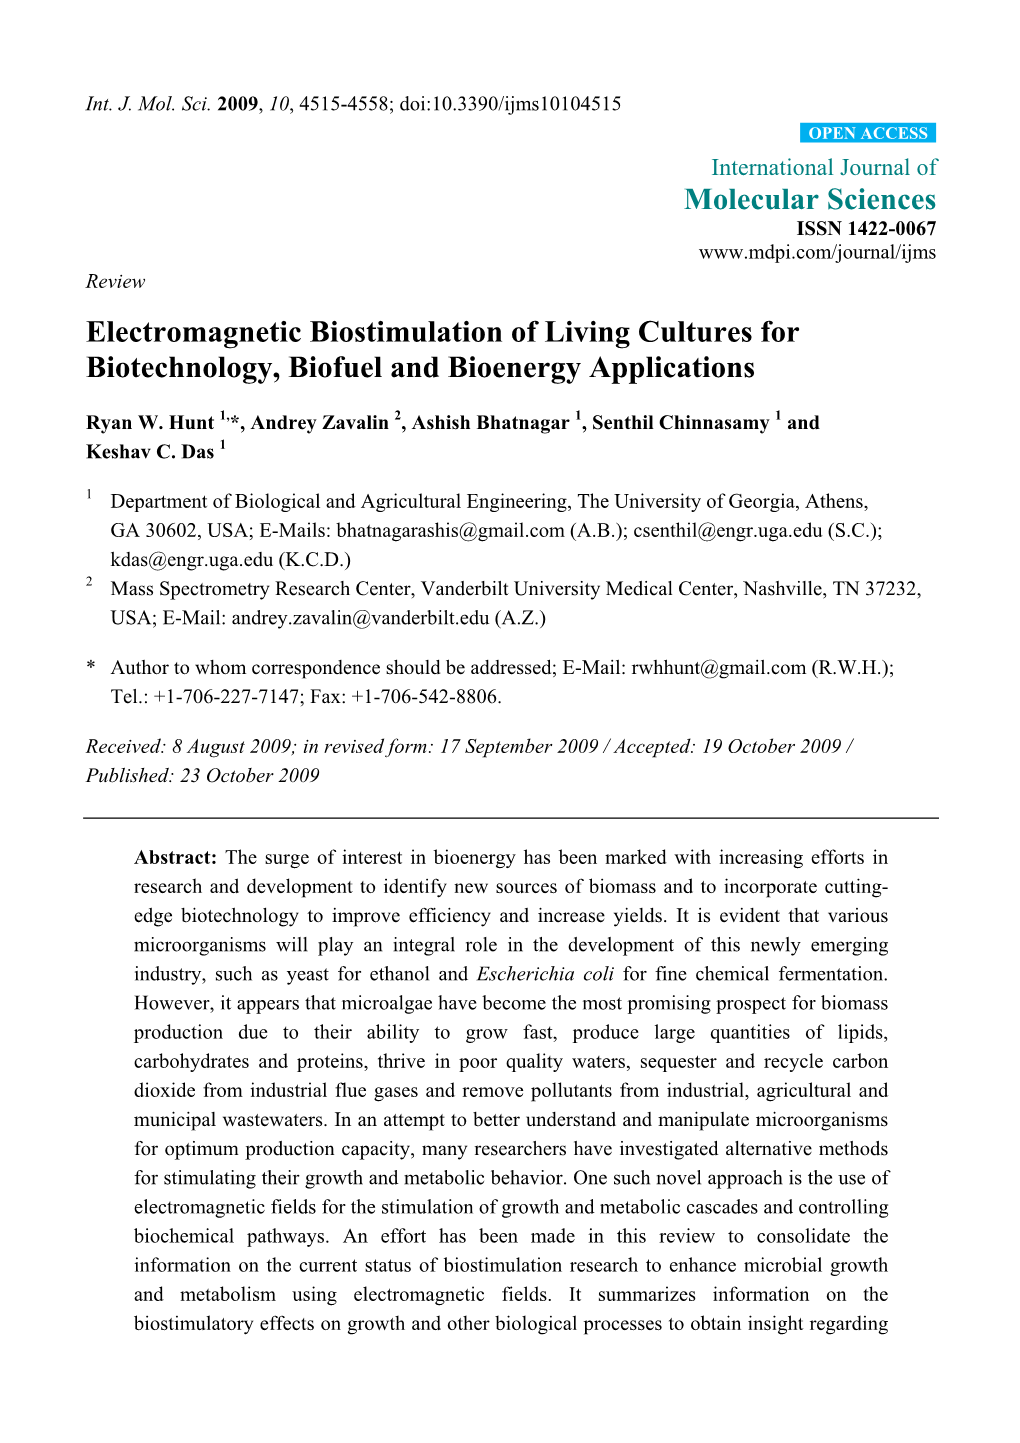 Electromagnetic Biostimulation of Living Cultures for Biotechnology, Biofuel and Bioenergy Applications